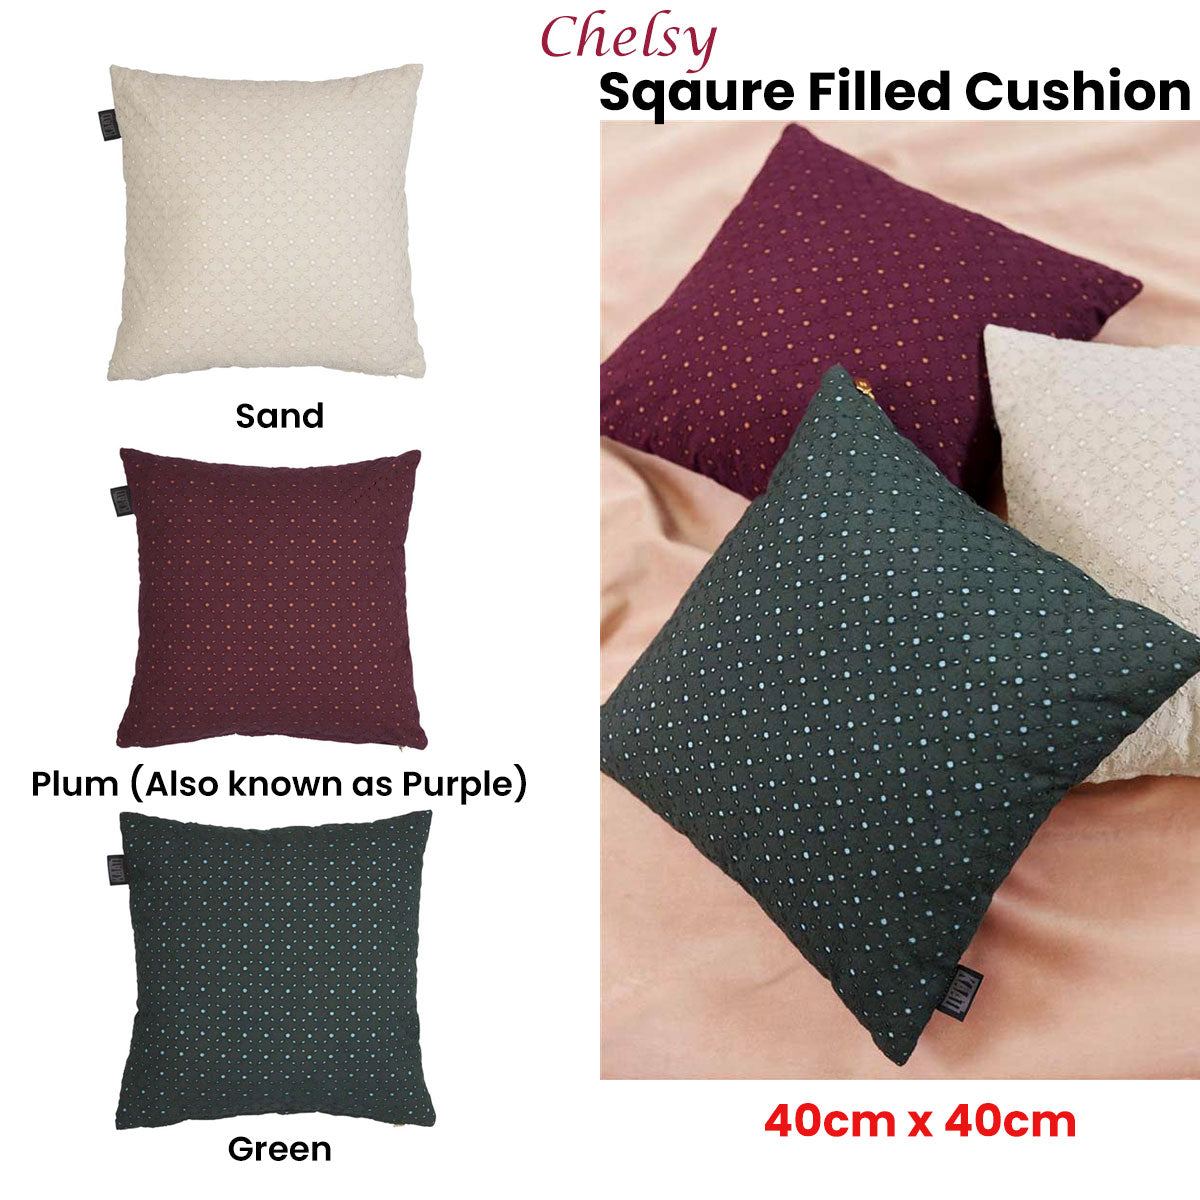 Bedding House Chelsy Sand Square Filled Cushion 40cm x 40cm